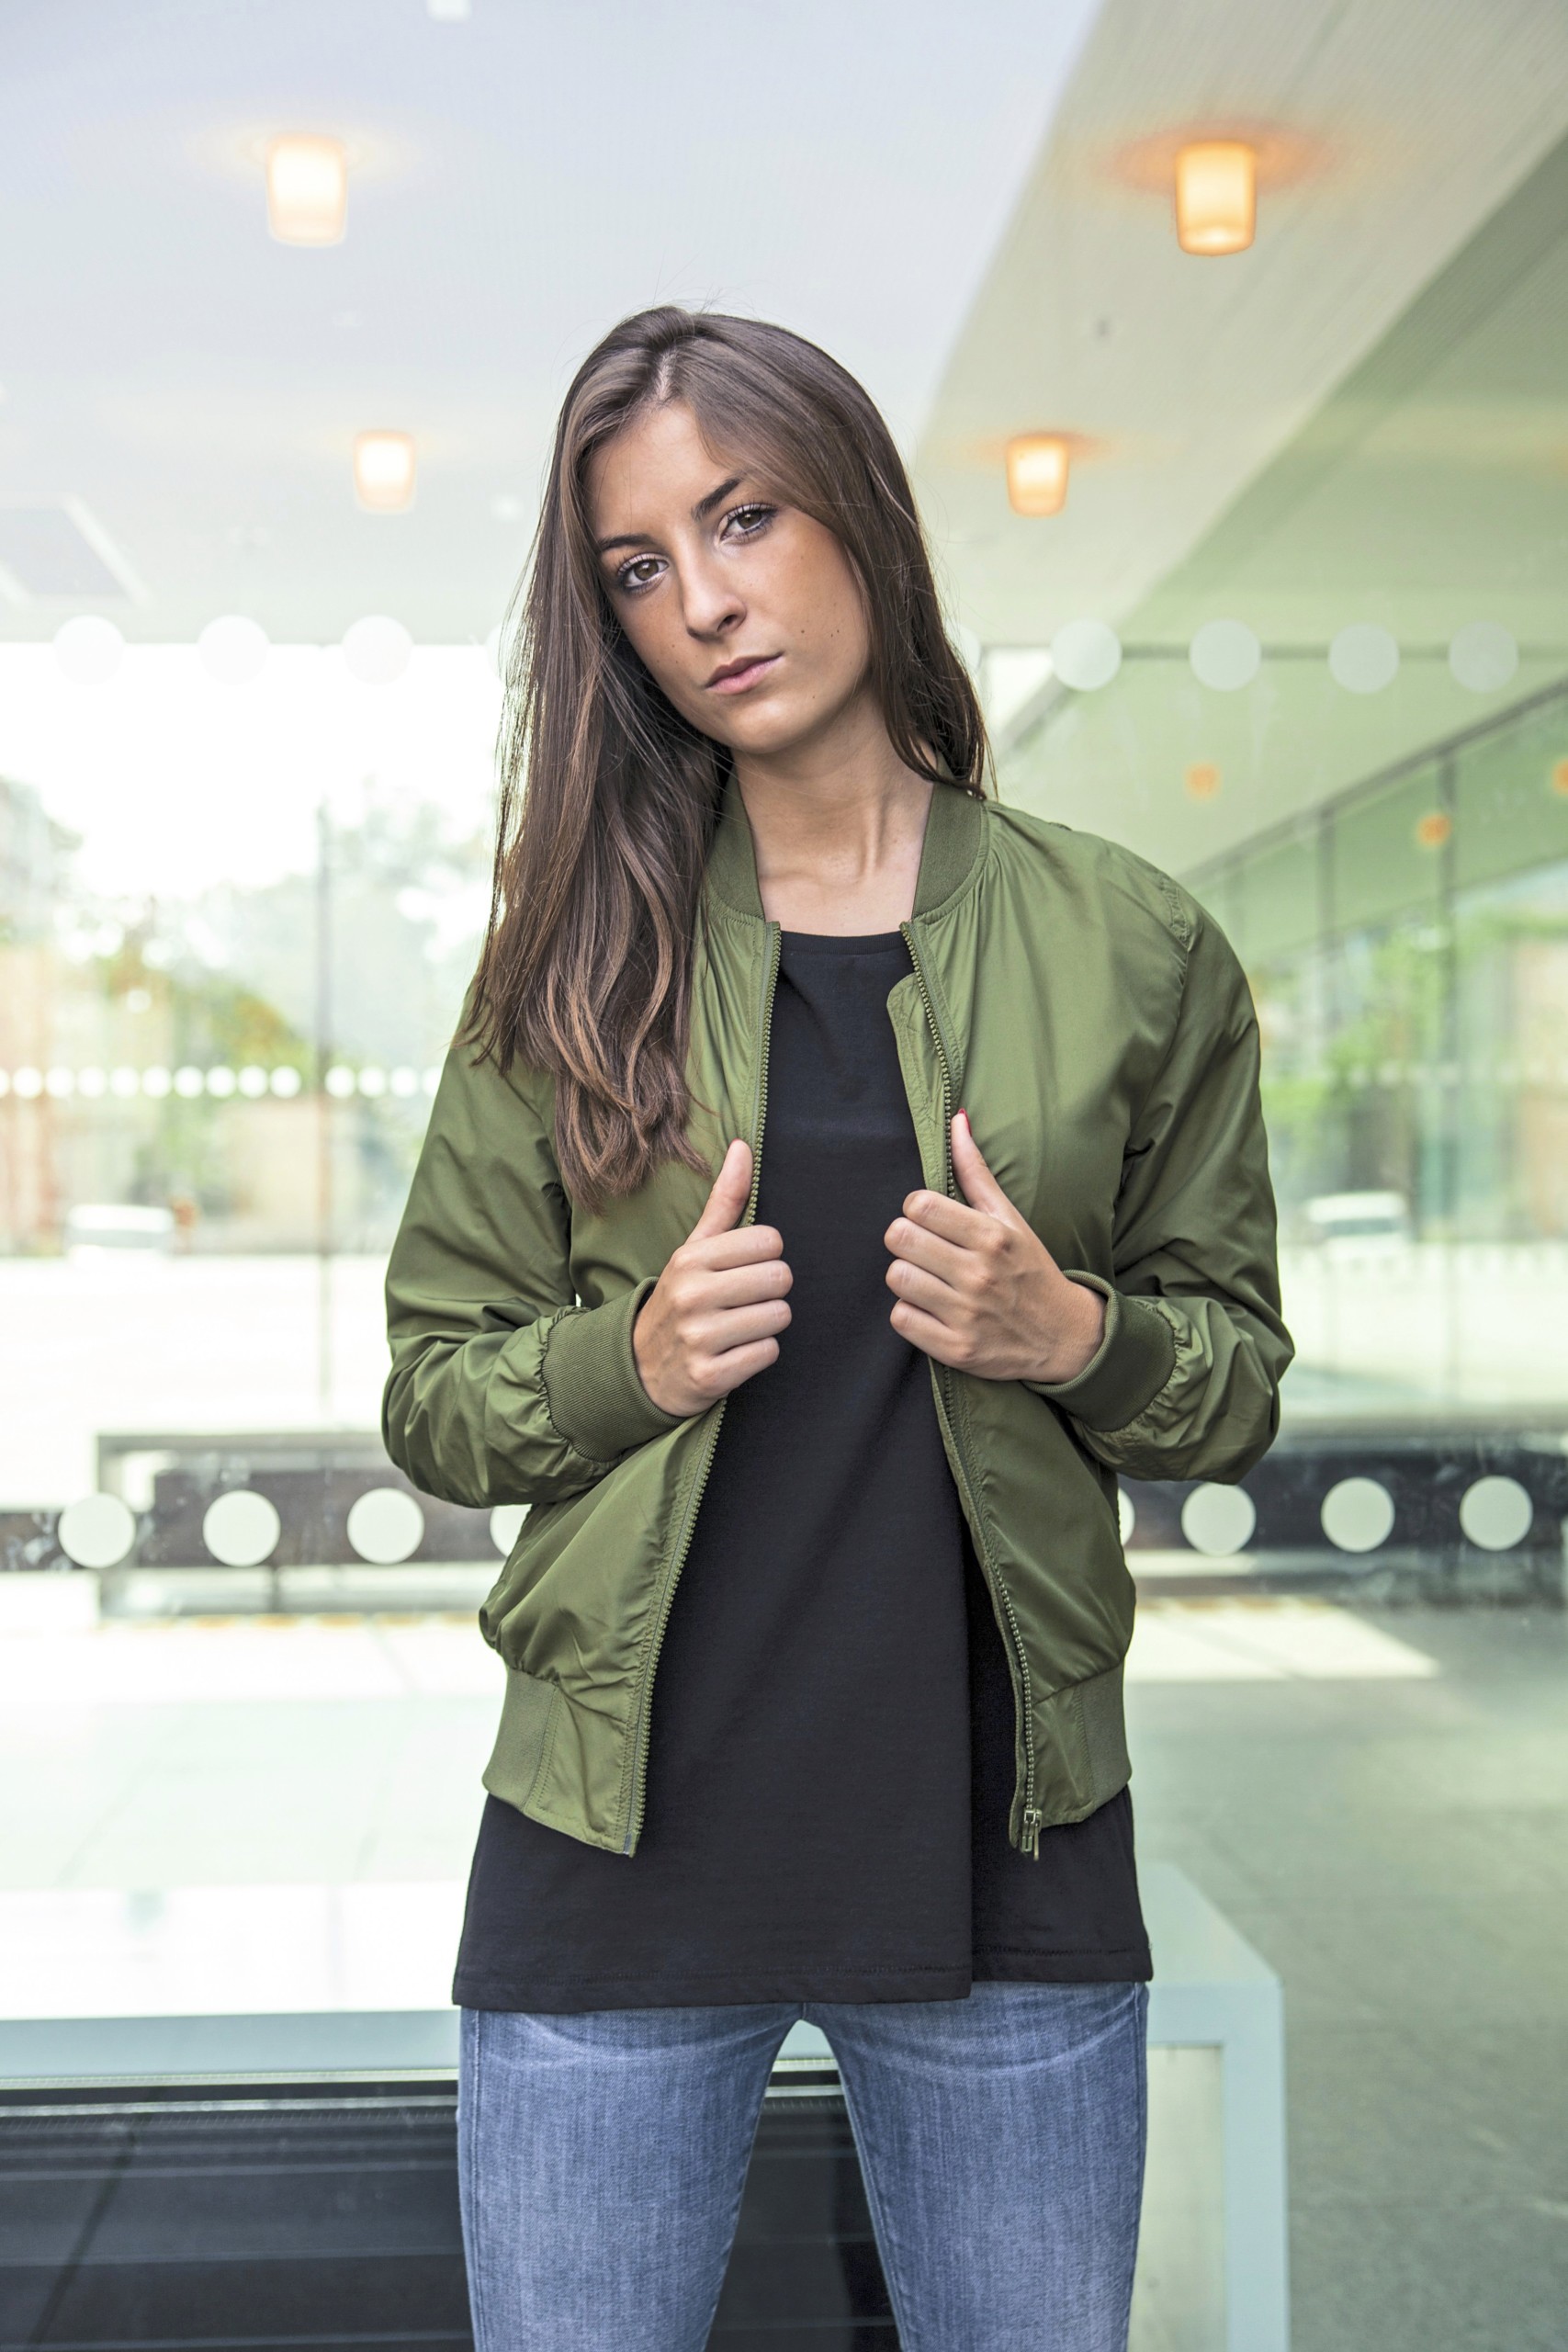 Build Your Brand - Build Your Brand - Ladies´ Nylon Bomber Jacket - BY044